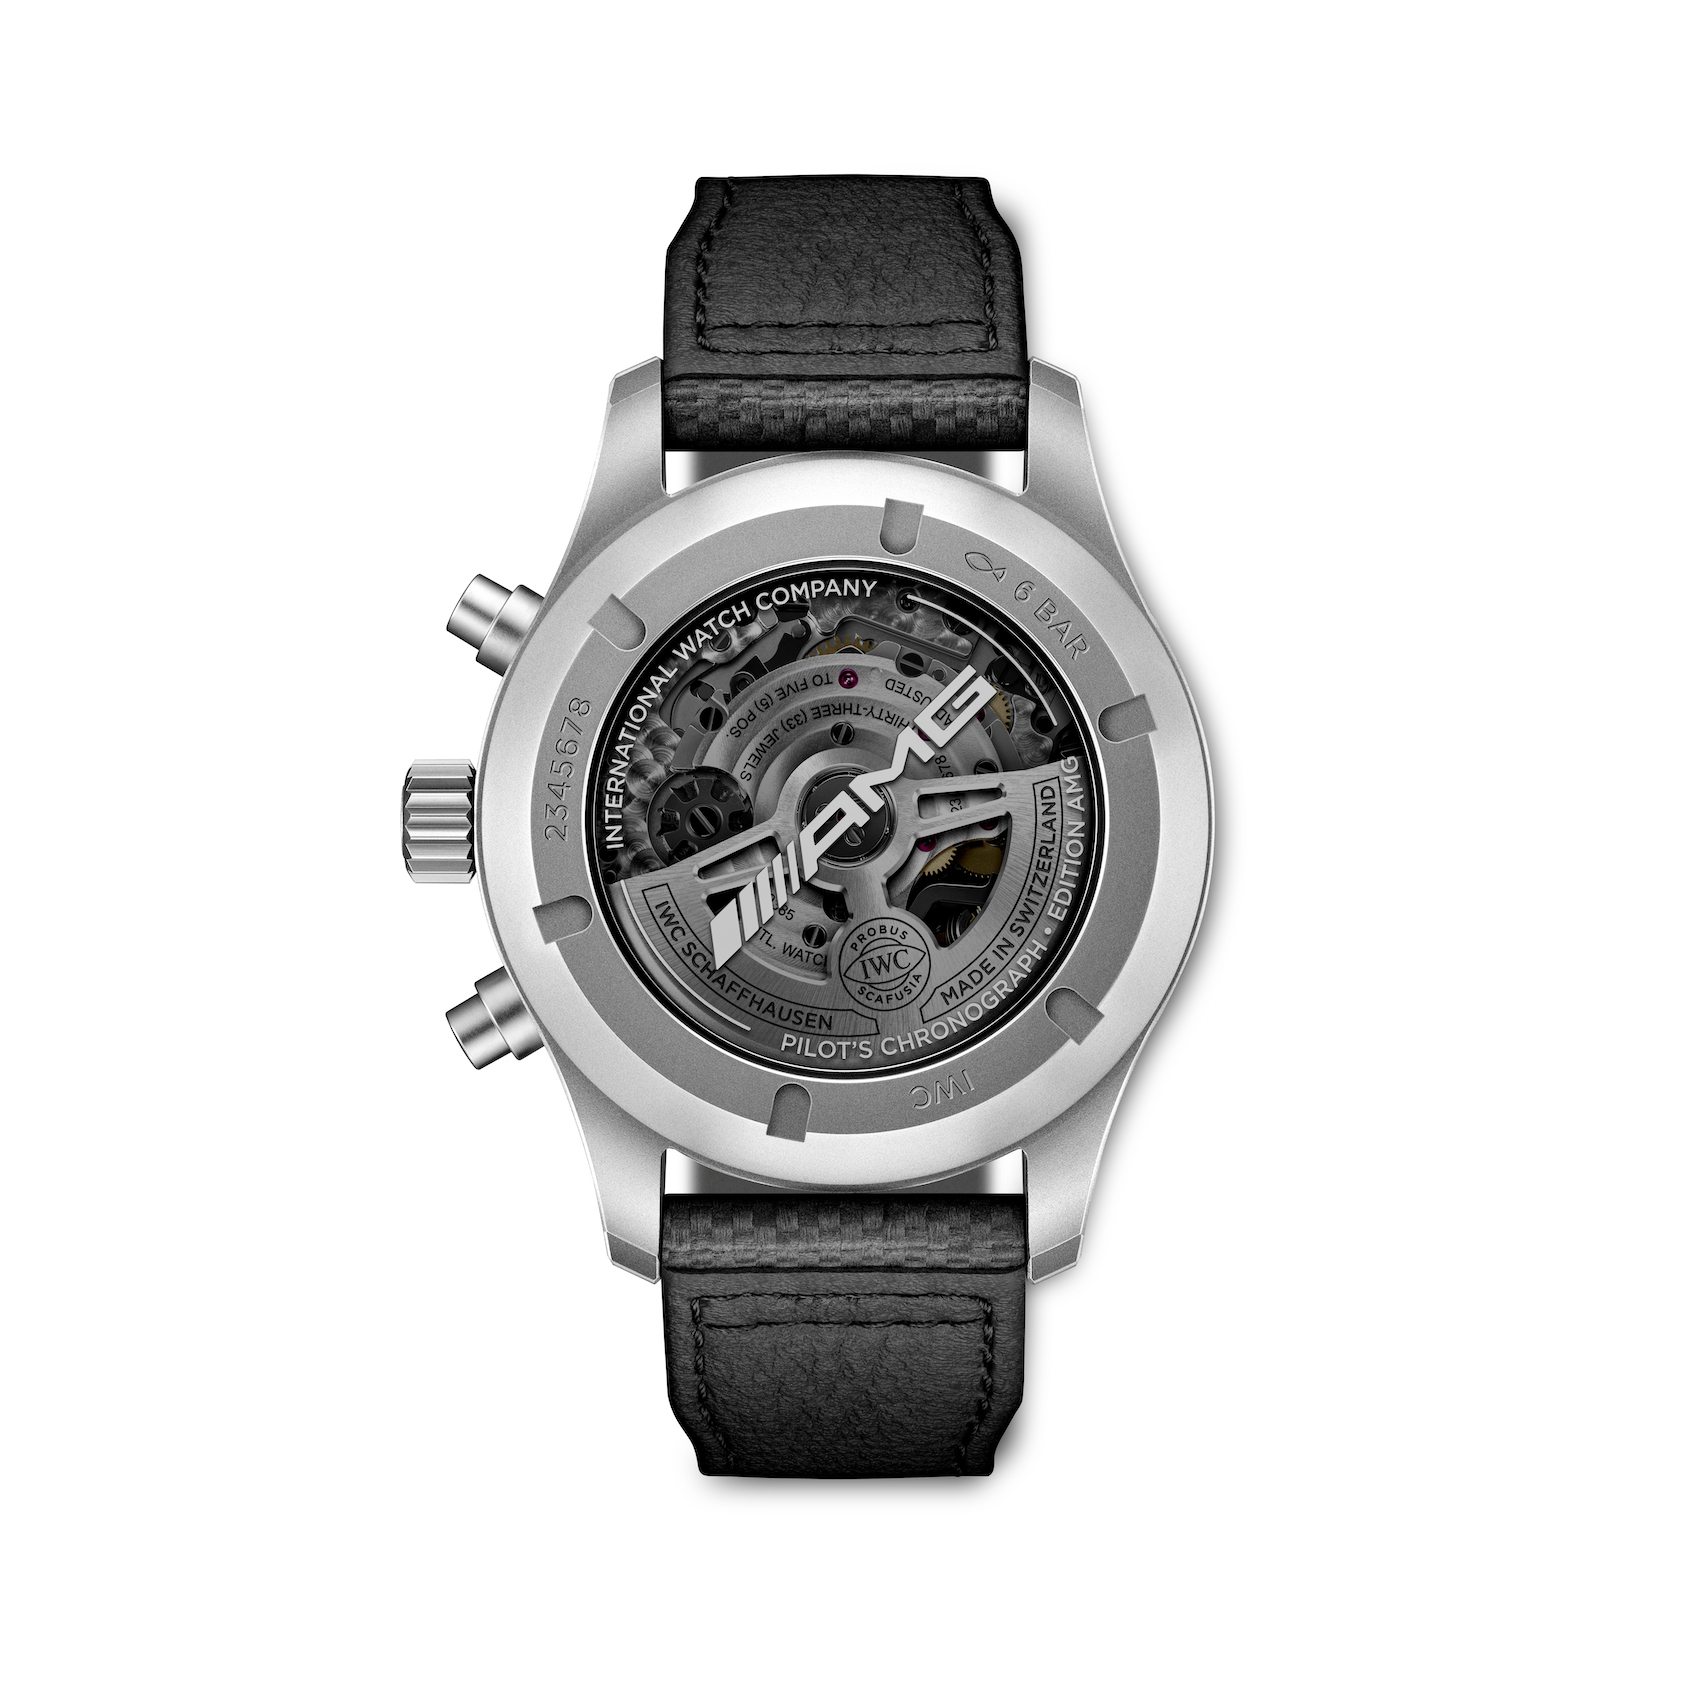 INTRODUCING: The IWC Pilot’s Watch Chronograph Edition AMG is made to ...